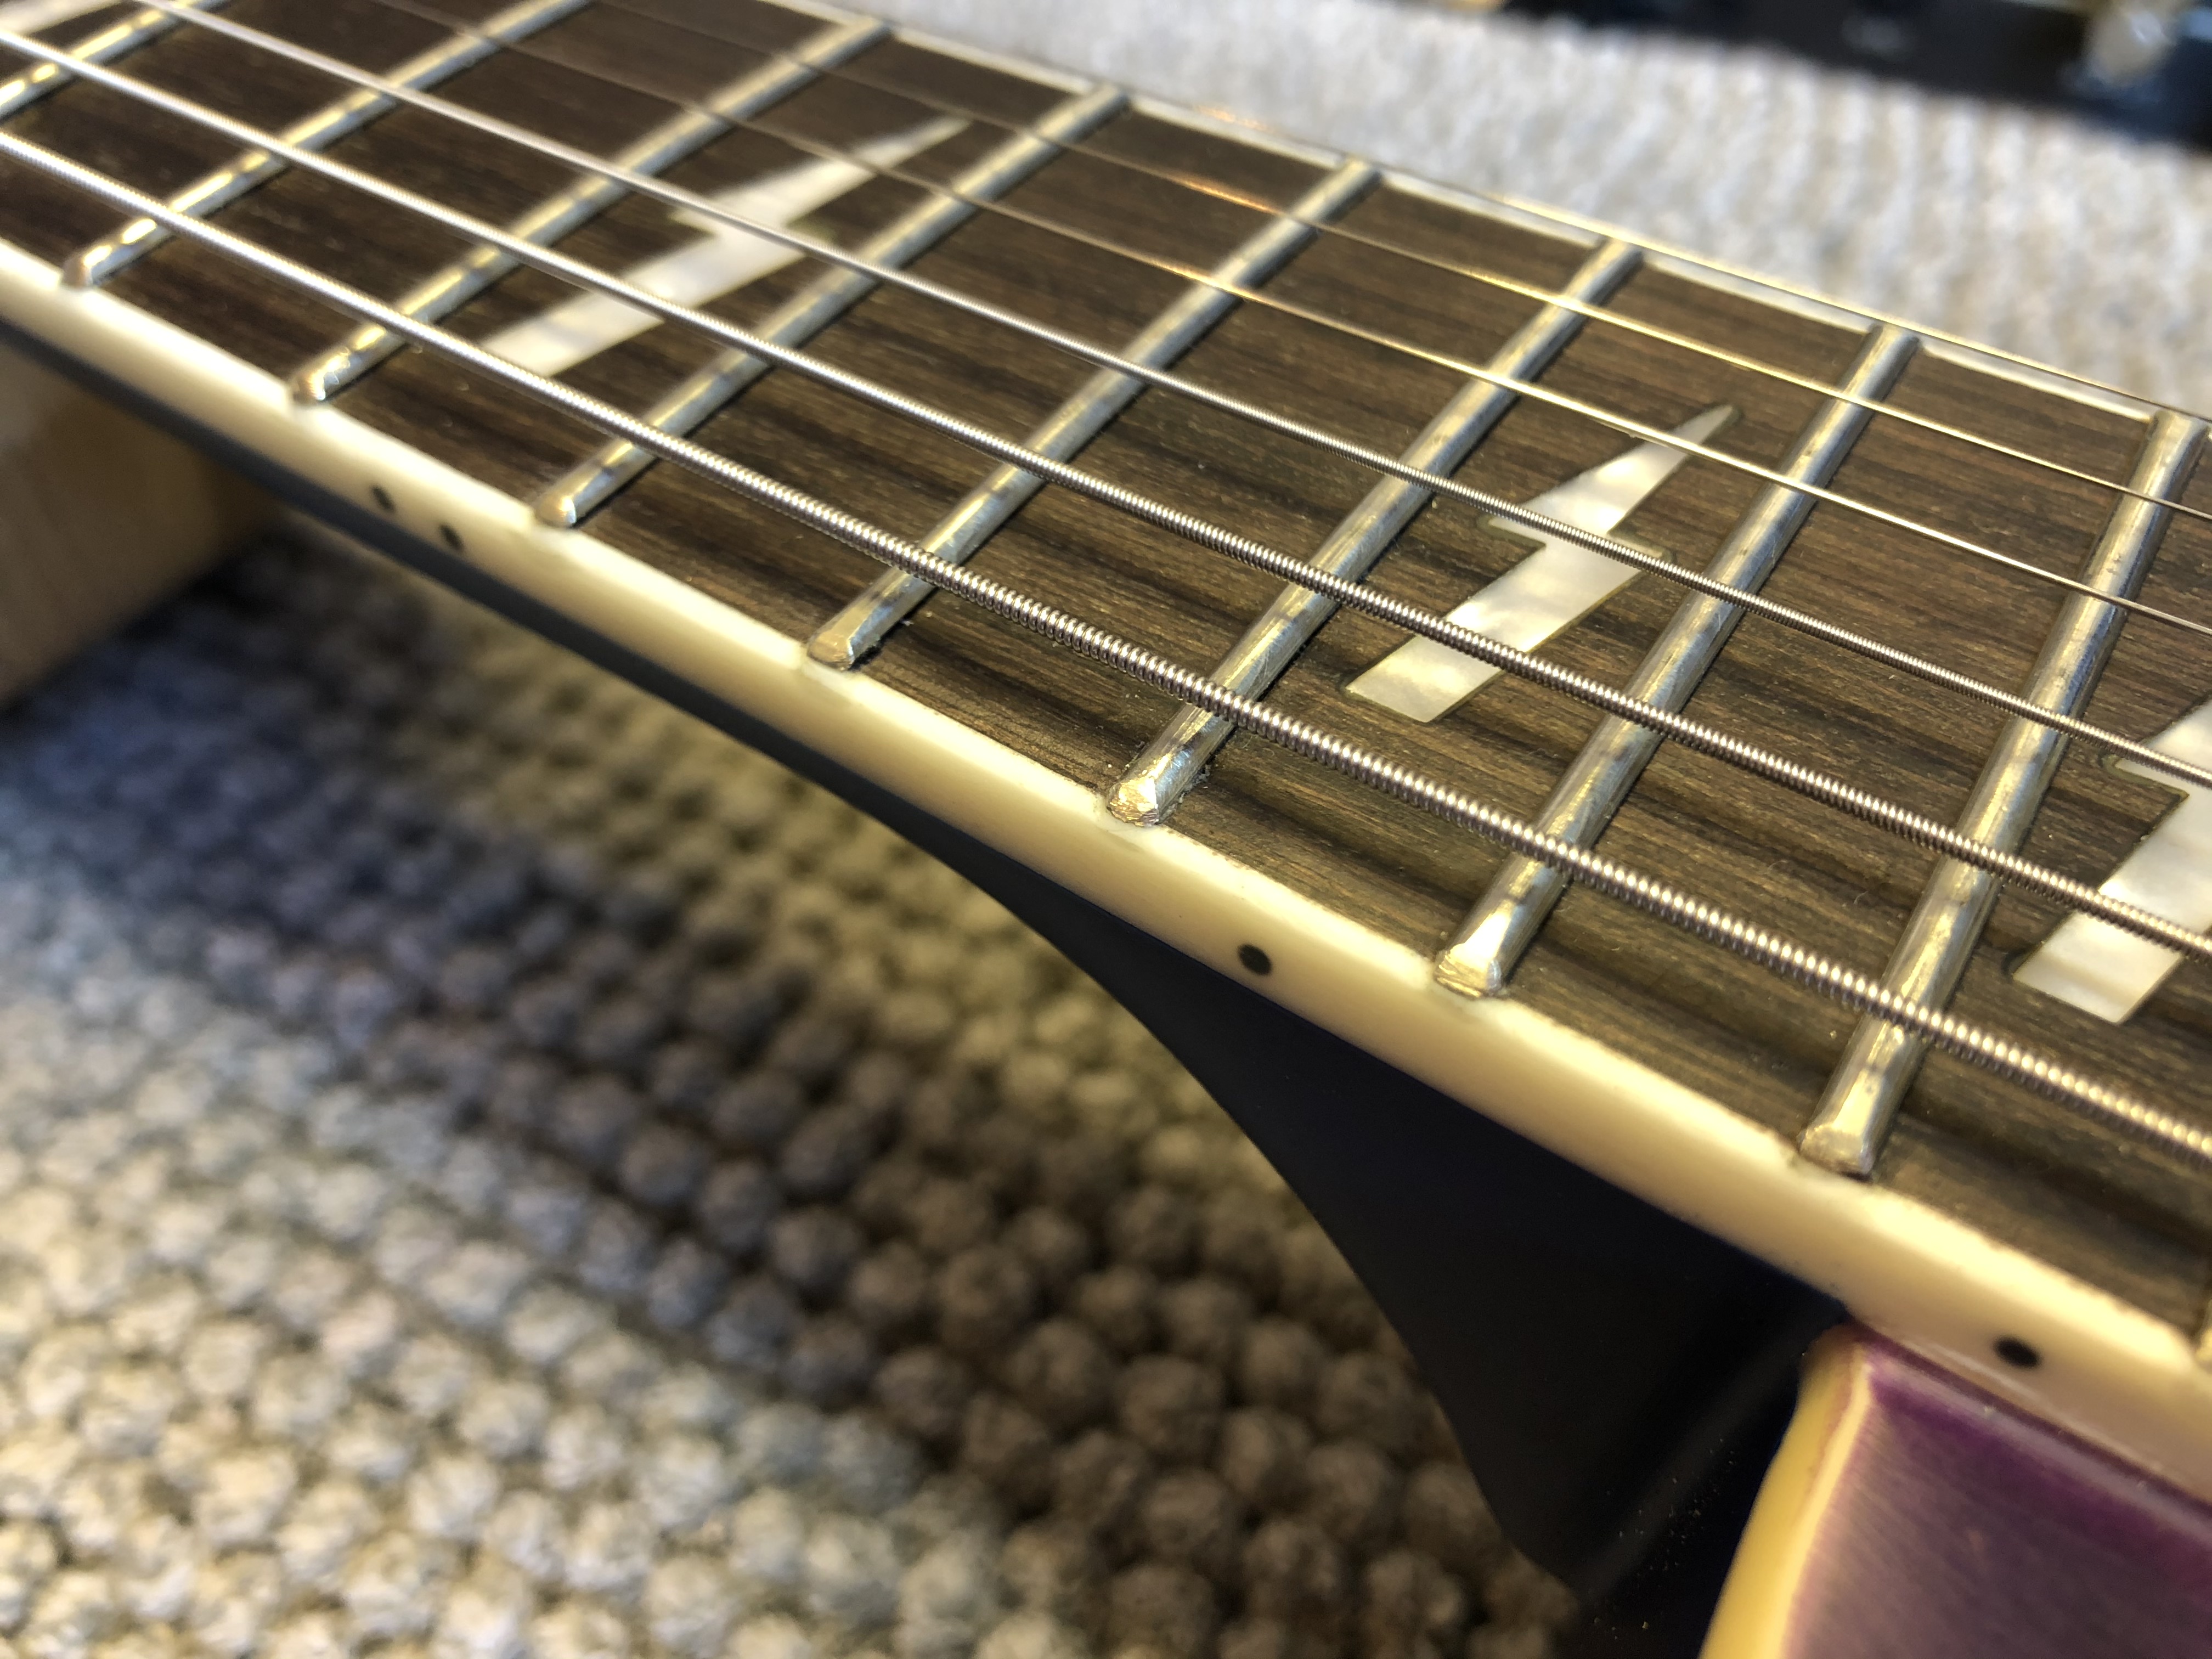 Not the best looking fret ends